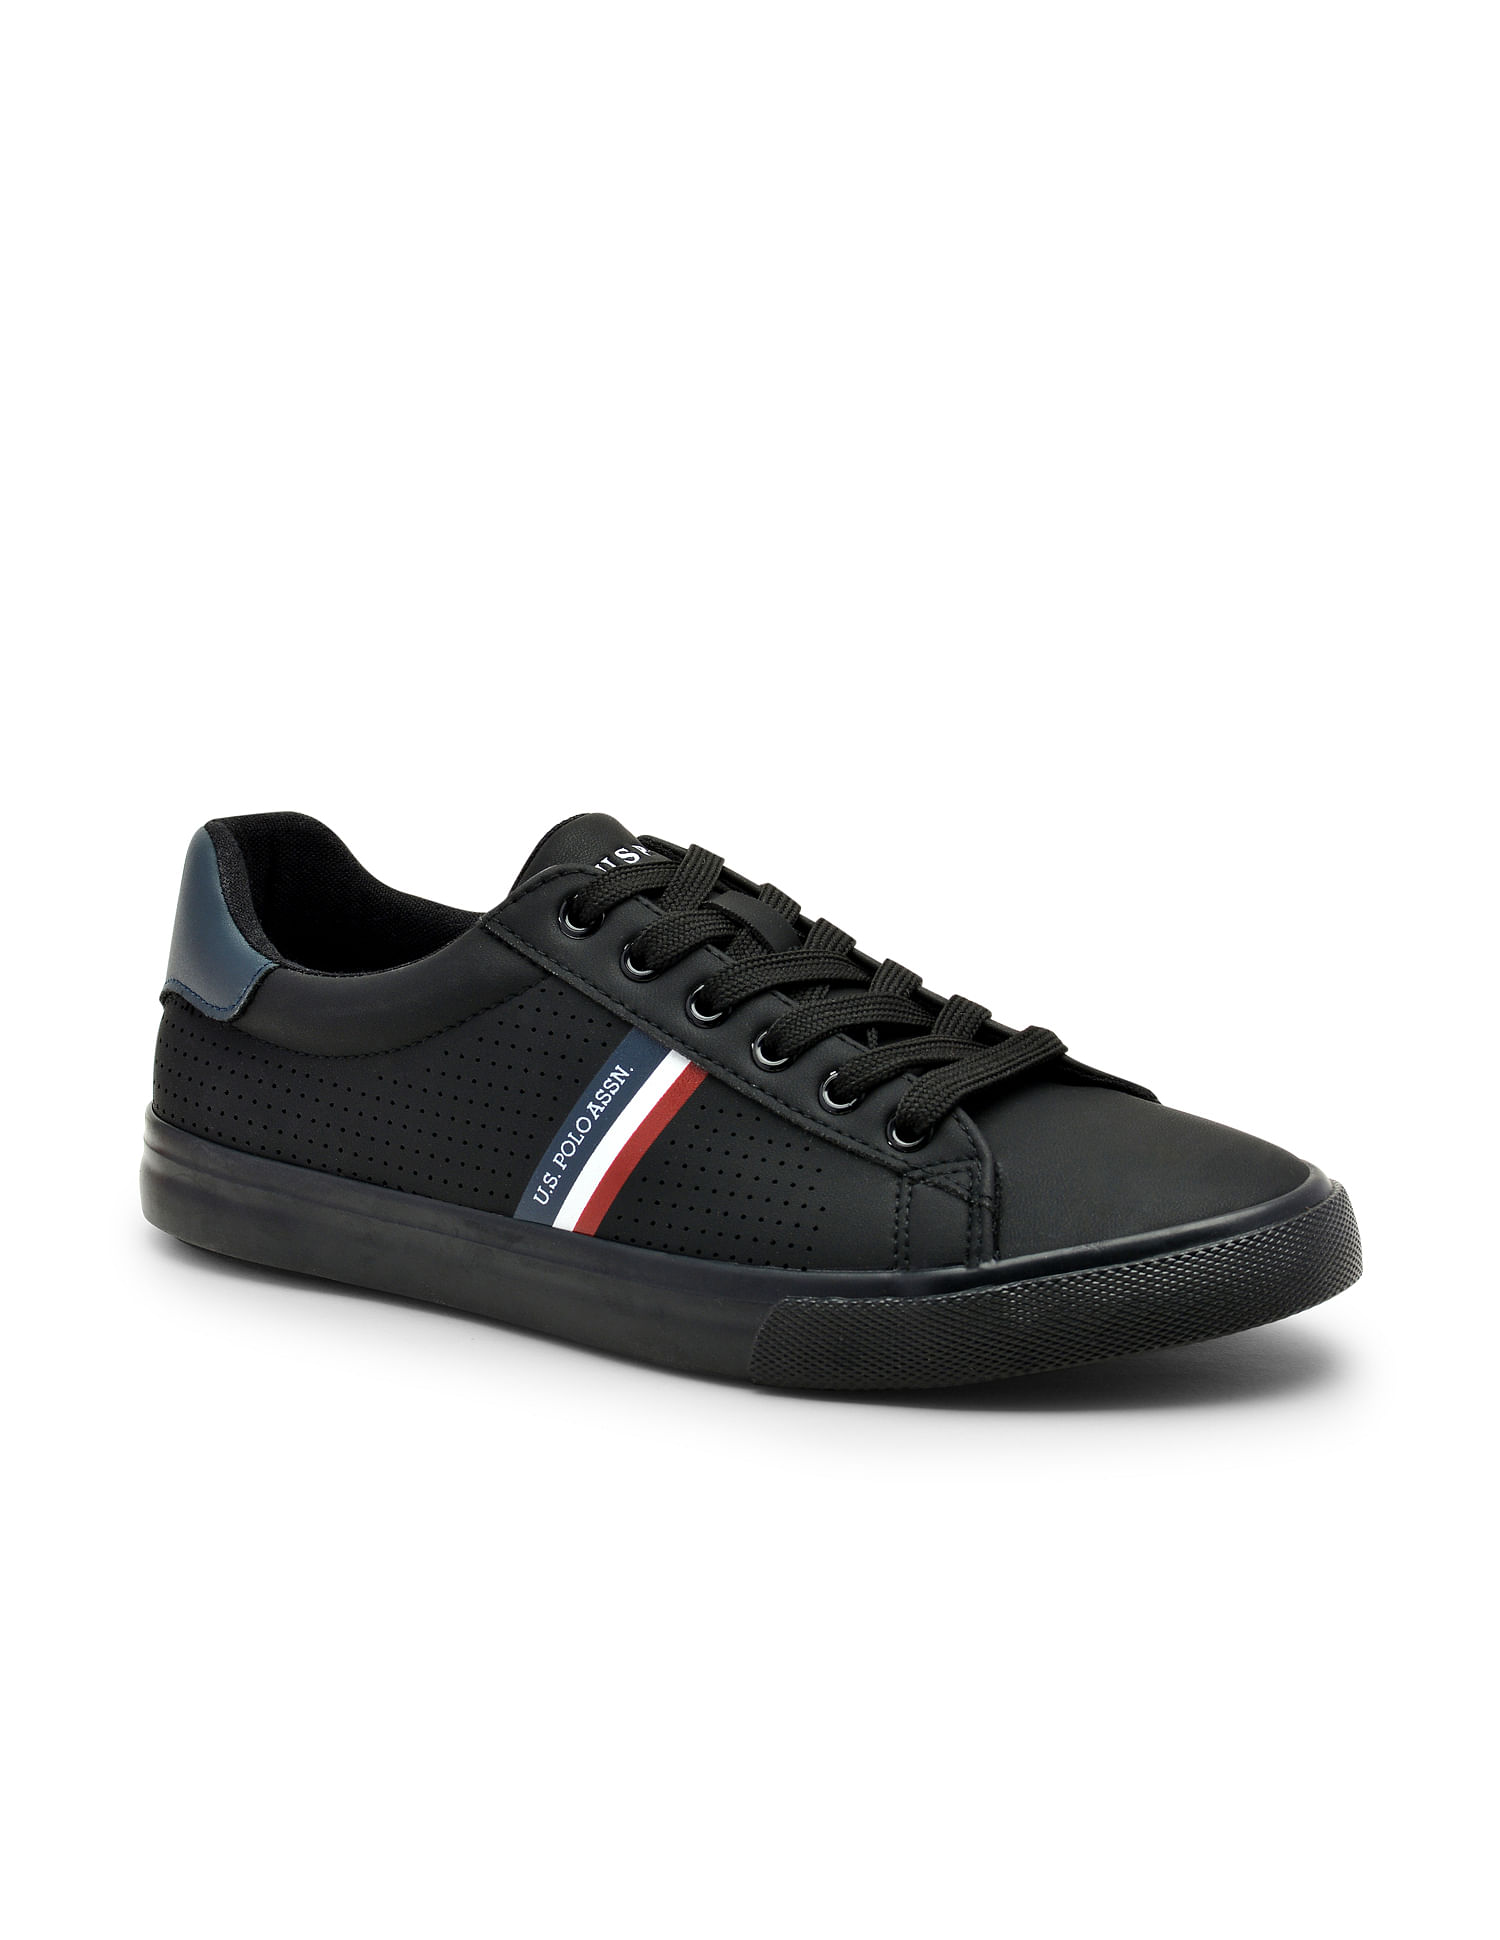 Gucci Black Perforated Leather Web Detail Low Top Sneakers Size 42.5 Gucci  | TLC